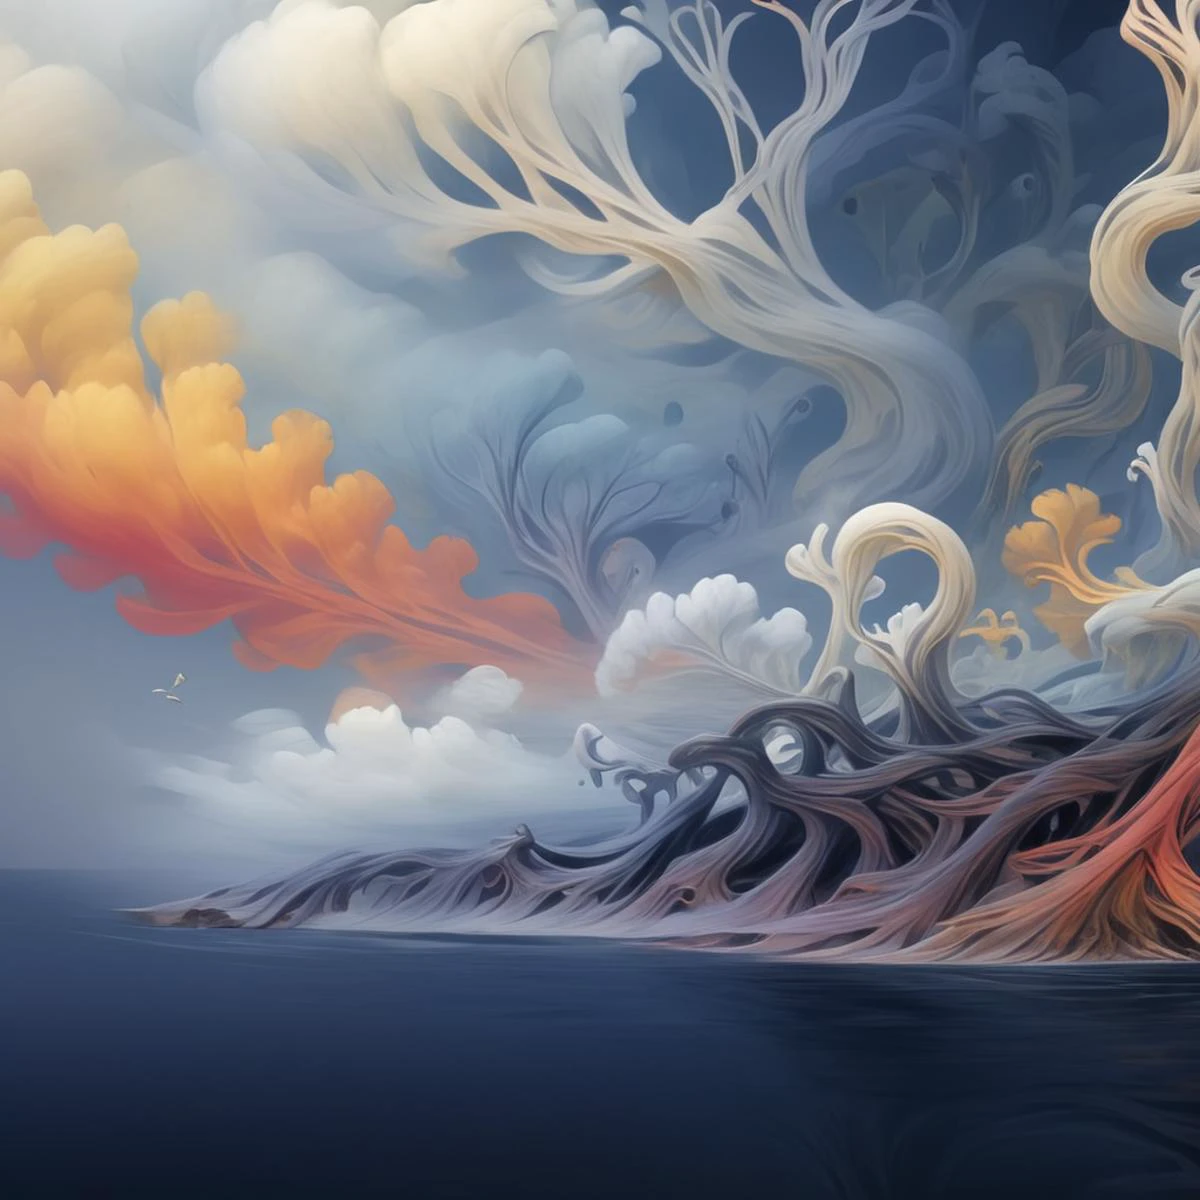 arttrlsn, , An ethereal cloud tree with roots and branches that form into various shapes, colorful, concept design for fantasy game, creating an otherworldly atmosphere. The branches of clouds form unique shapes and colors, creating the illusion it is growing from within them. The background features dark tones to contrast the bright colors of the cloudlike branches., detailed, high resolution, smoke billows from its base, symbolizing both chaos and beauty in nature. This concept could be used as a digital art piece or for fantasy book cover design in the style of various artists., symbolizing growth in various areas such as creativity or personal development. Digital art style, the colors of flames glow red, the overall color scheme has light tones. The digital art style creates a mysterious atmosphere in the style of digital art., the sky above is dark blue, the trunk is shaped like an island surrounded by water, white clouds form in various shapes, yellow and orange, An ethereal cloud tree with roots that wind through the sky, A cloud tree with roots that twist and wind